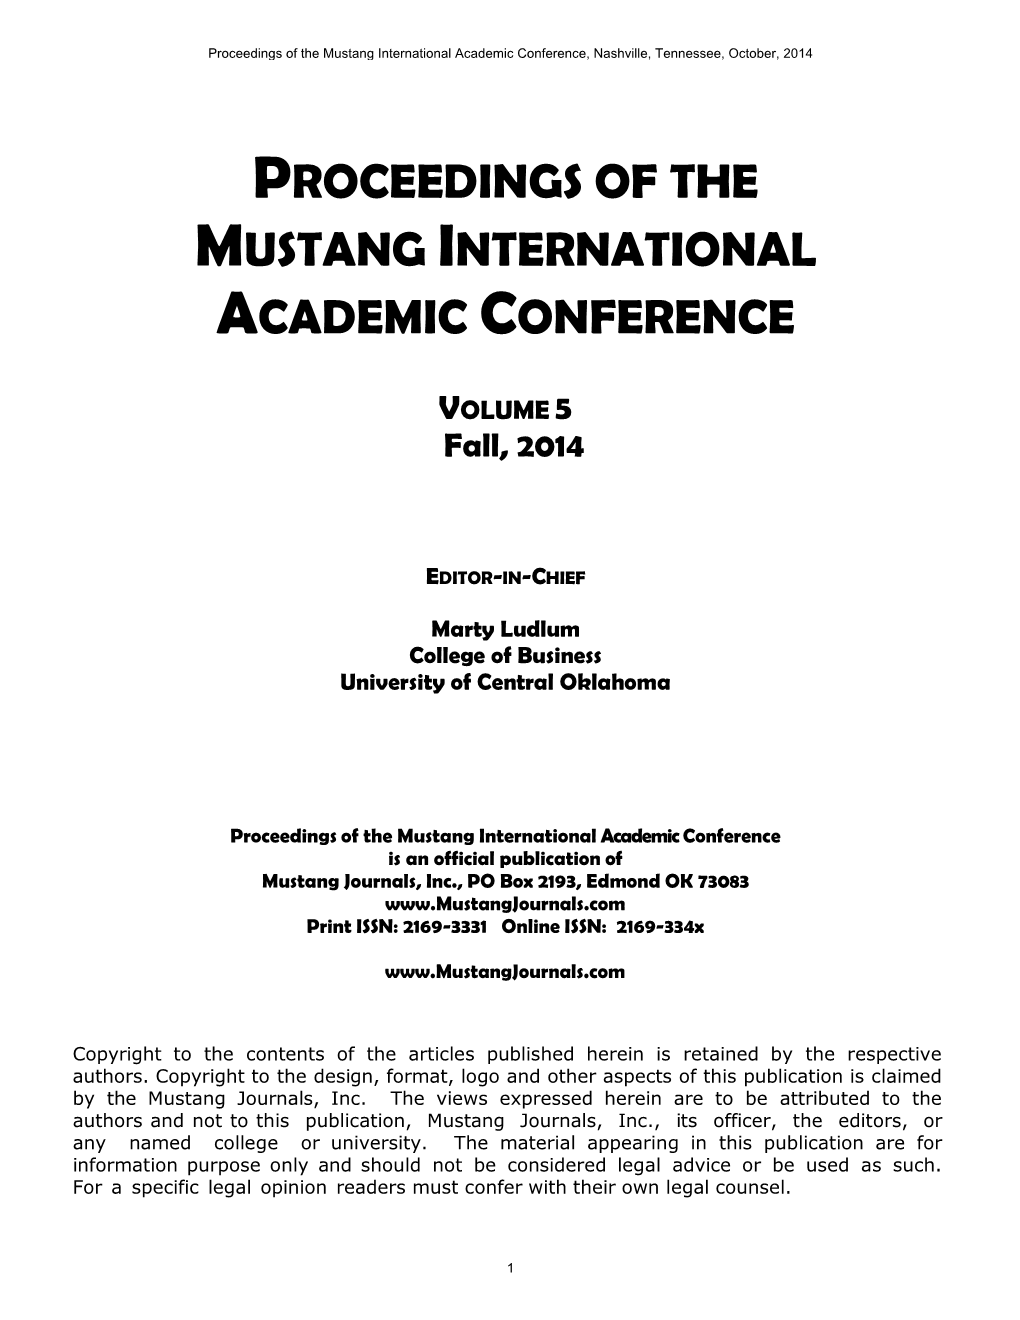 Proceedings of the Mustang International Academic Conference, Nashville, Tennessee, October, 2014